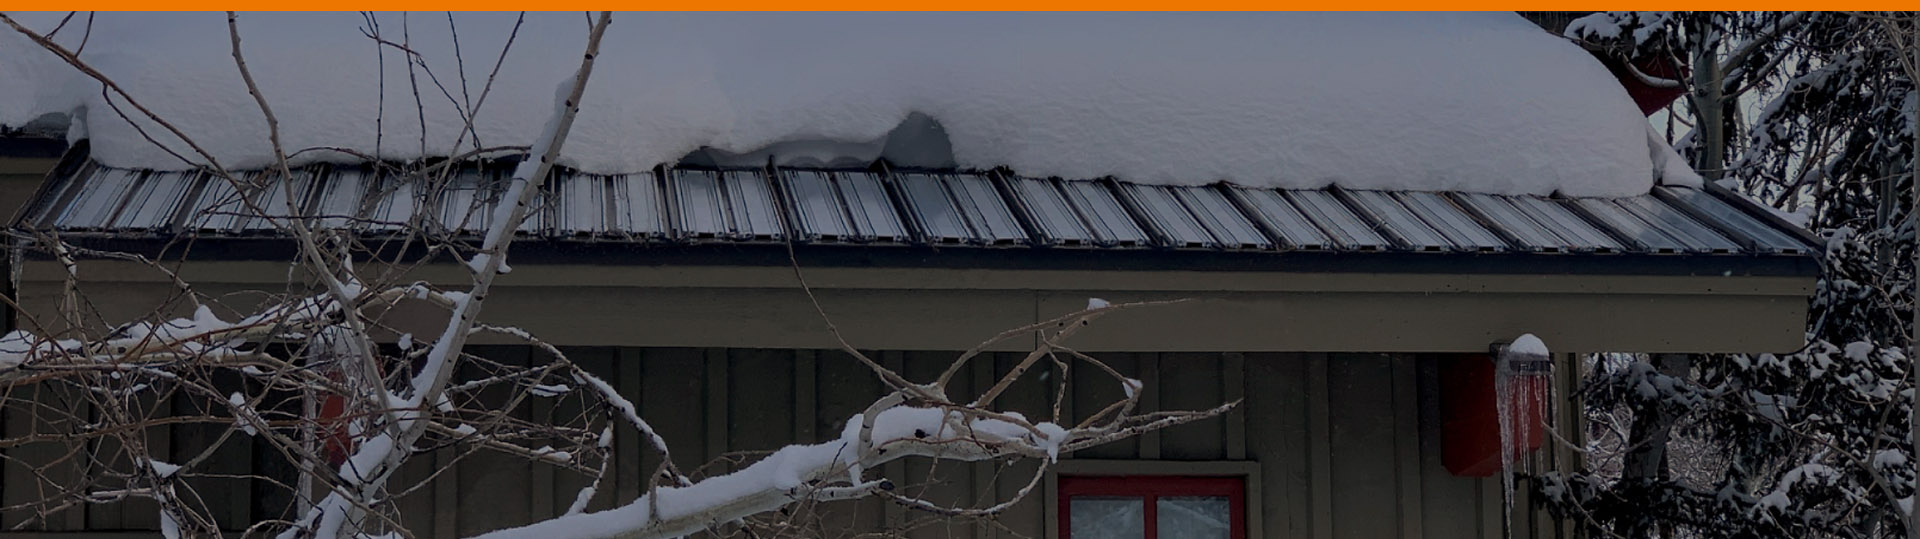 Best roof de-icing panel systems